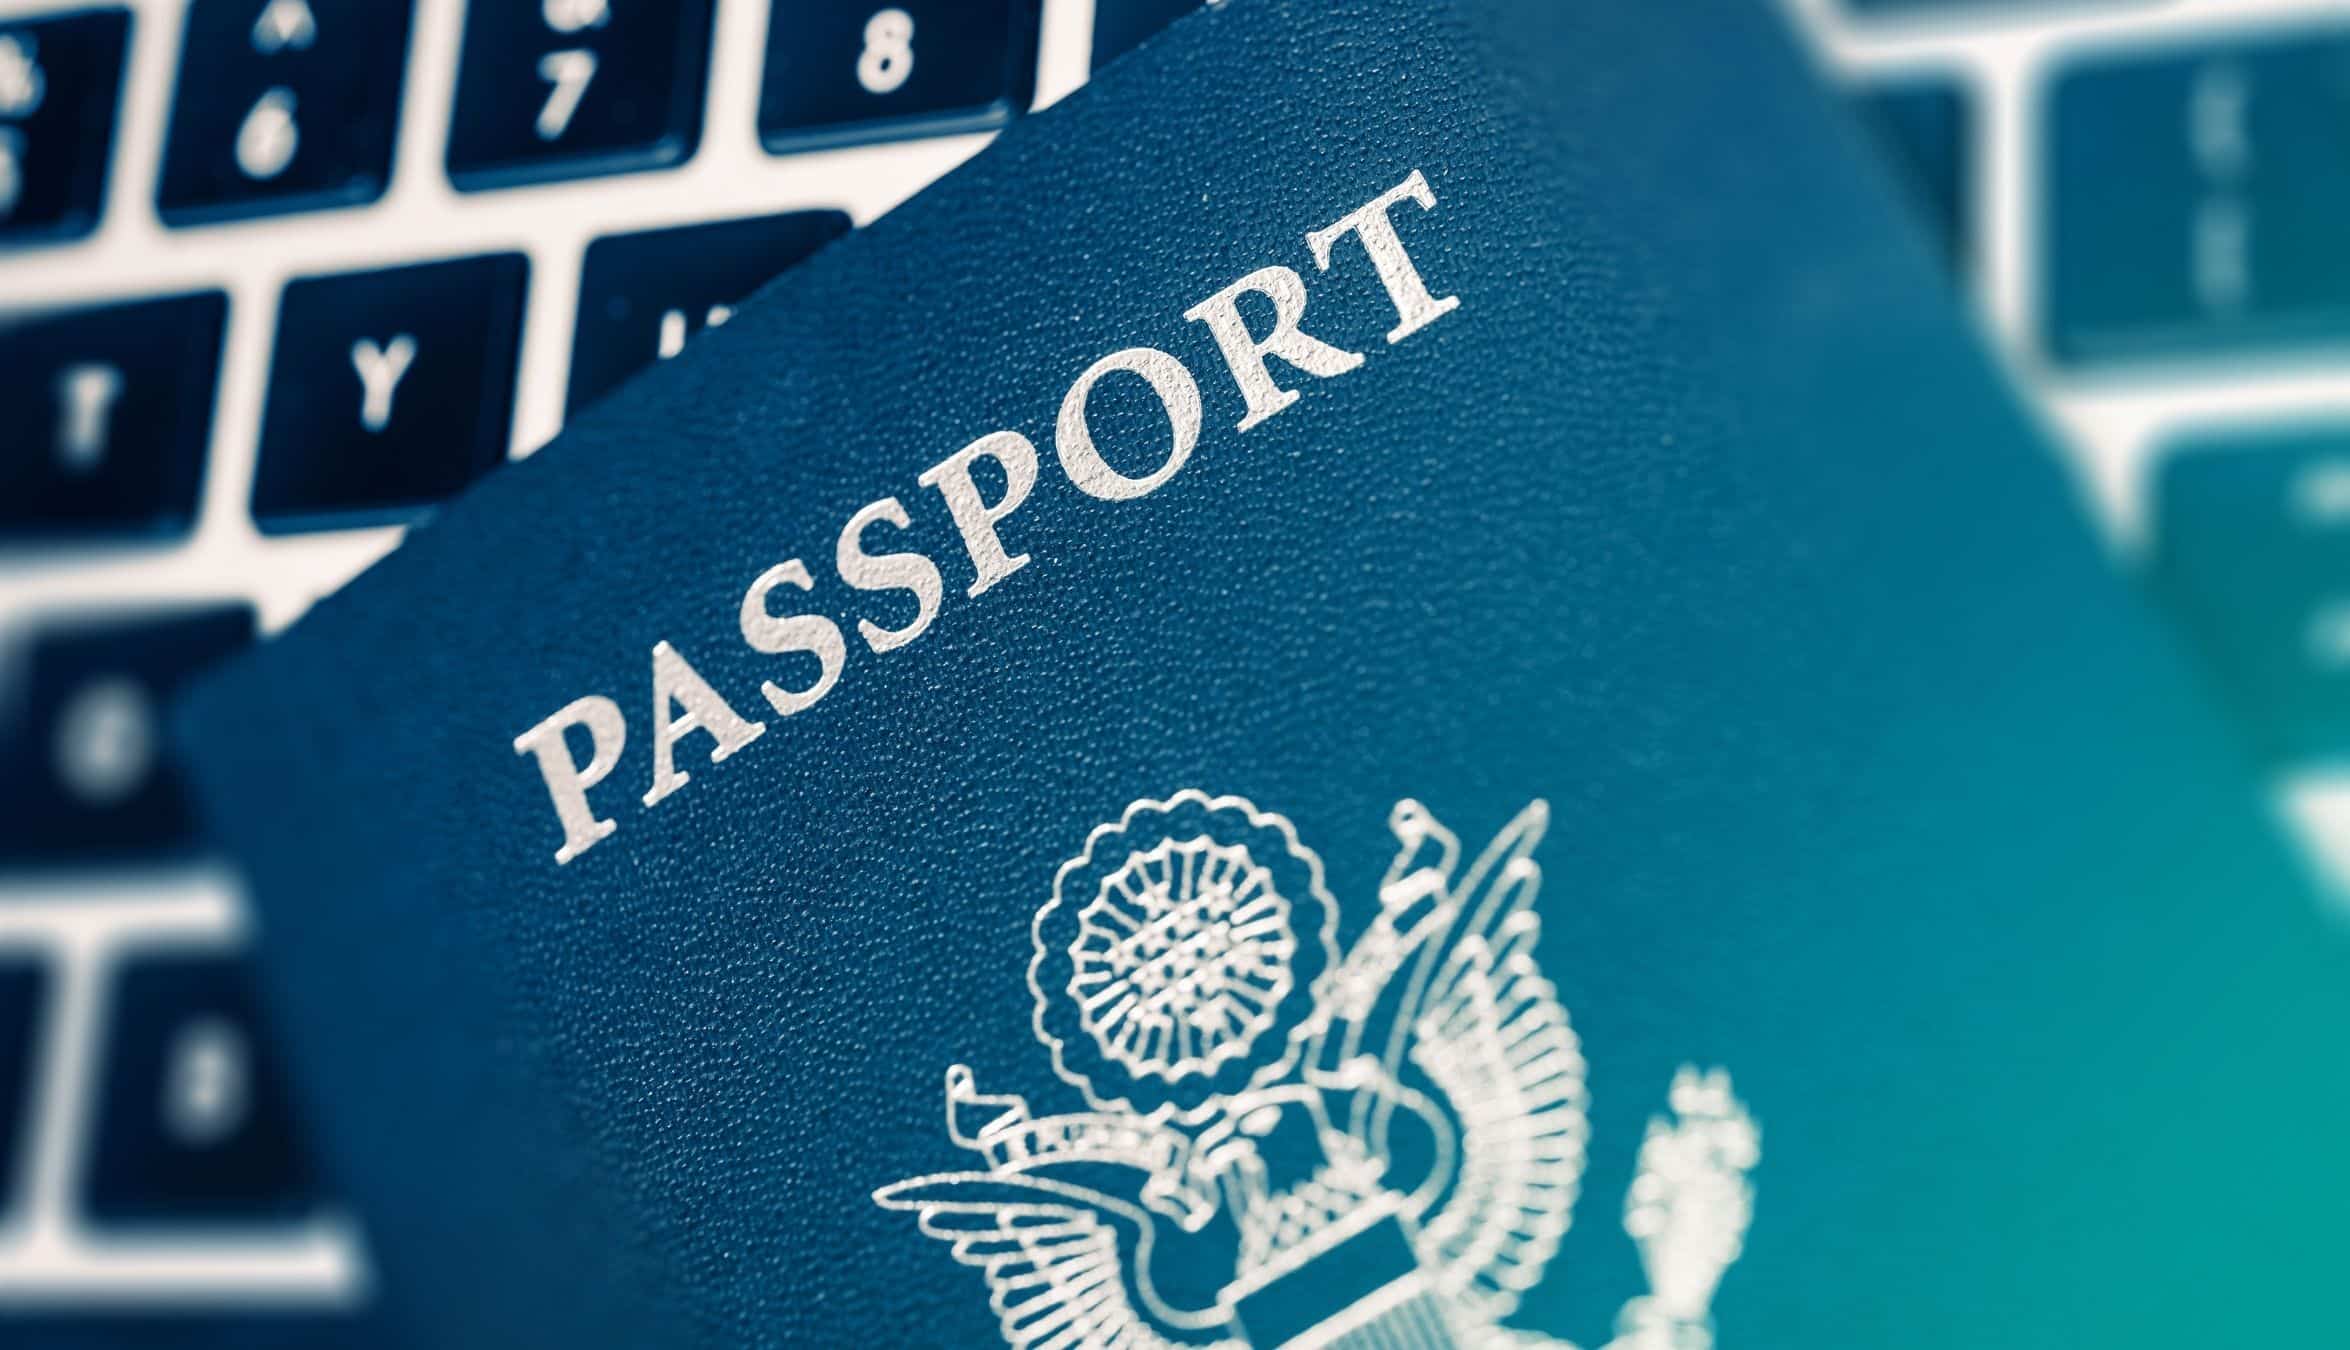 Spain’s new digital nomad visa: what you need to know